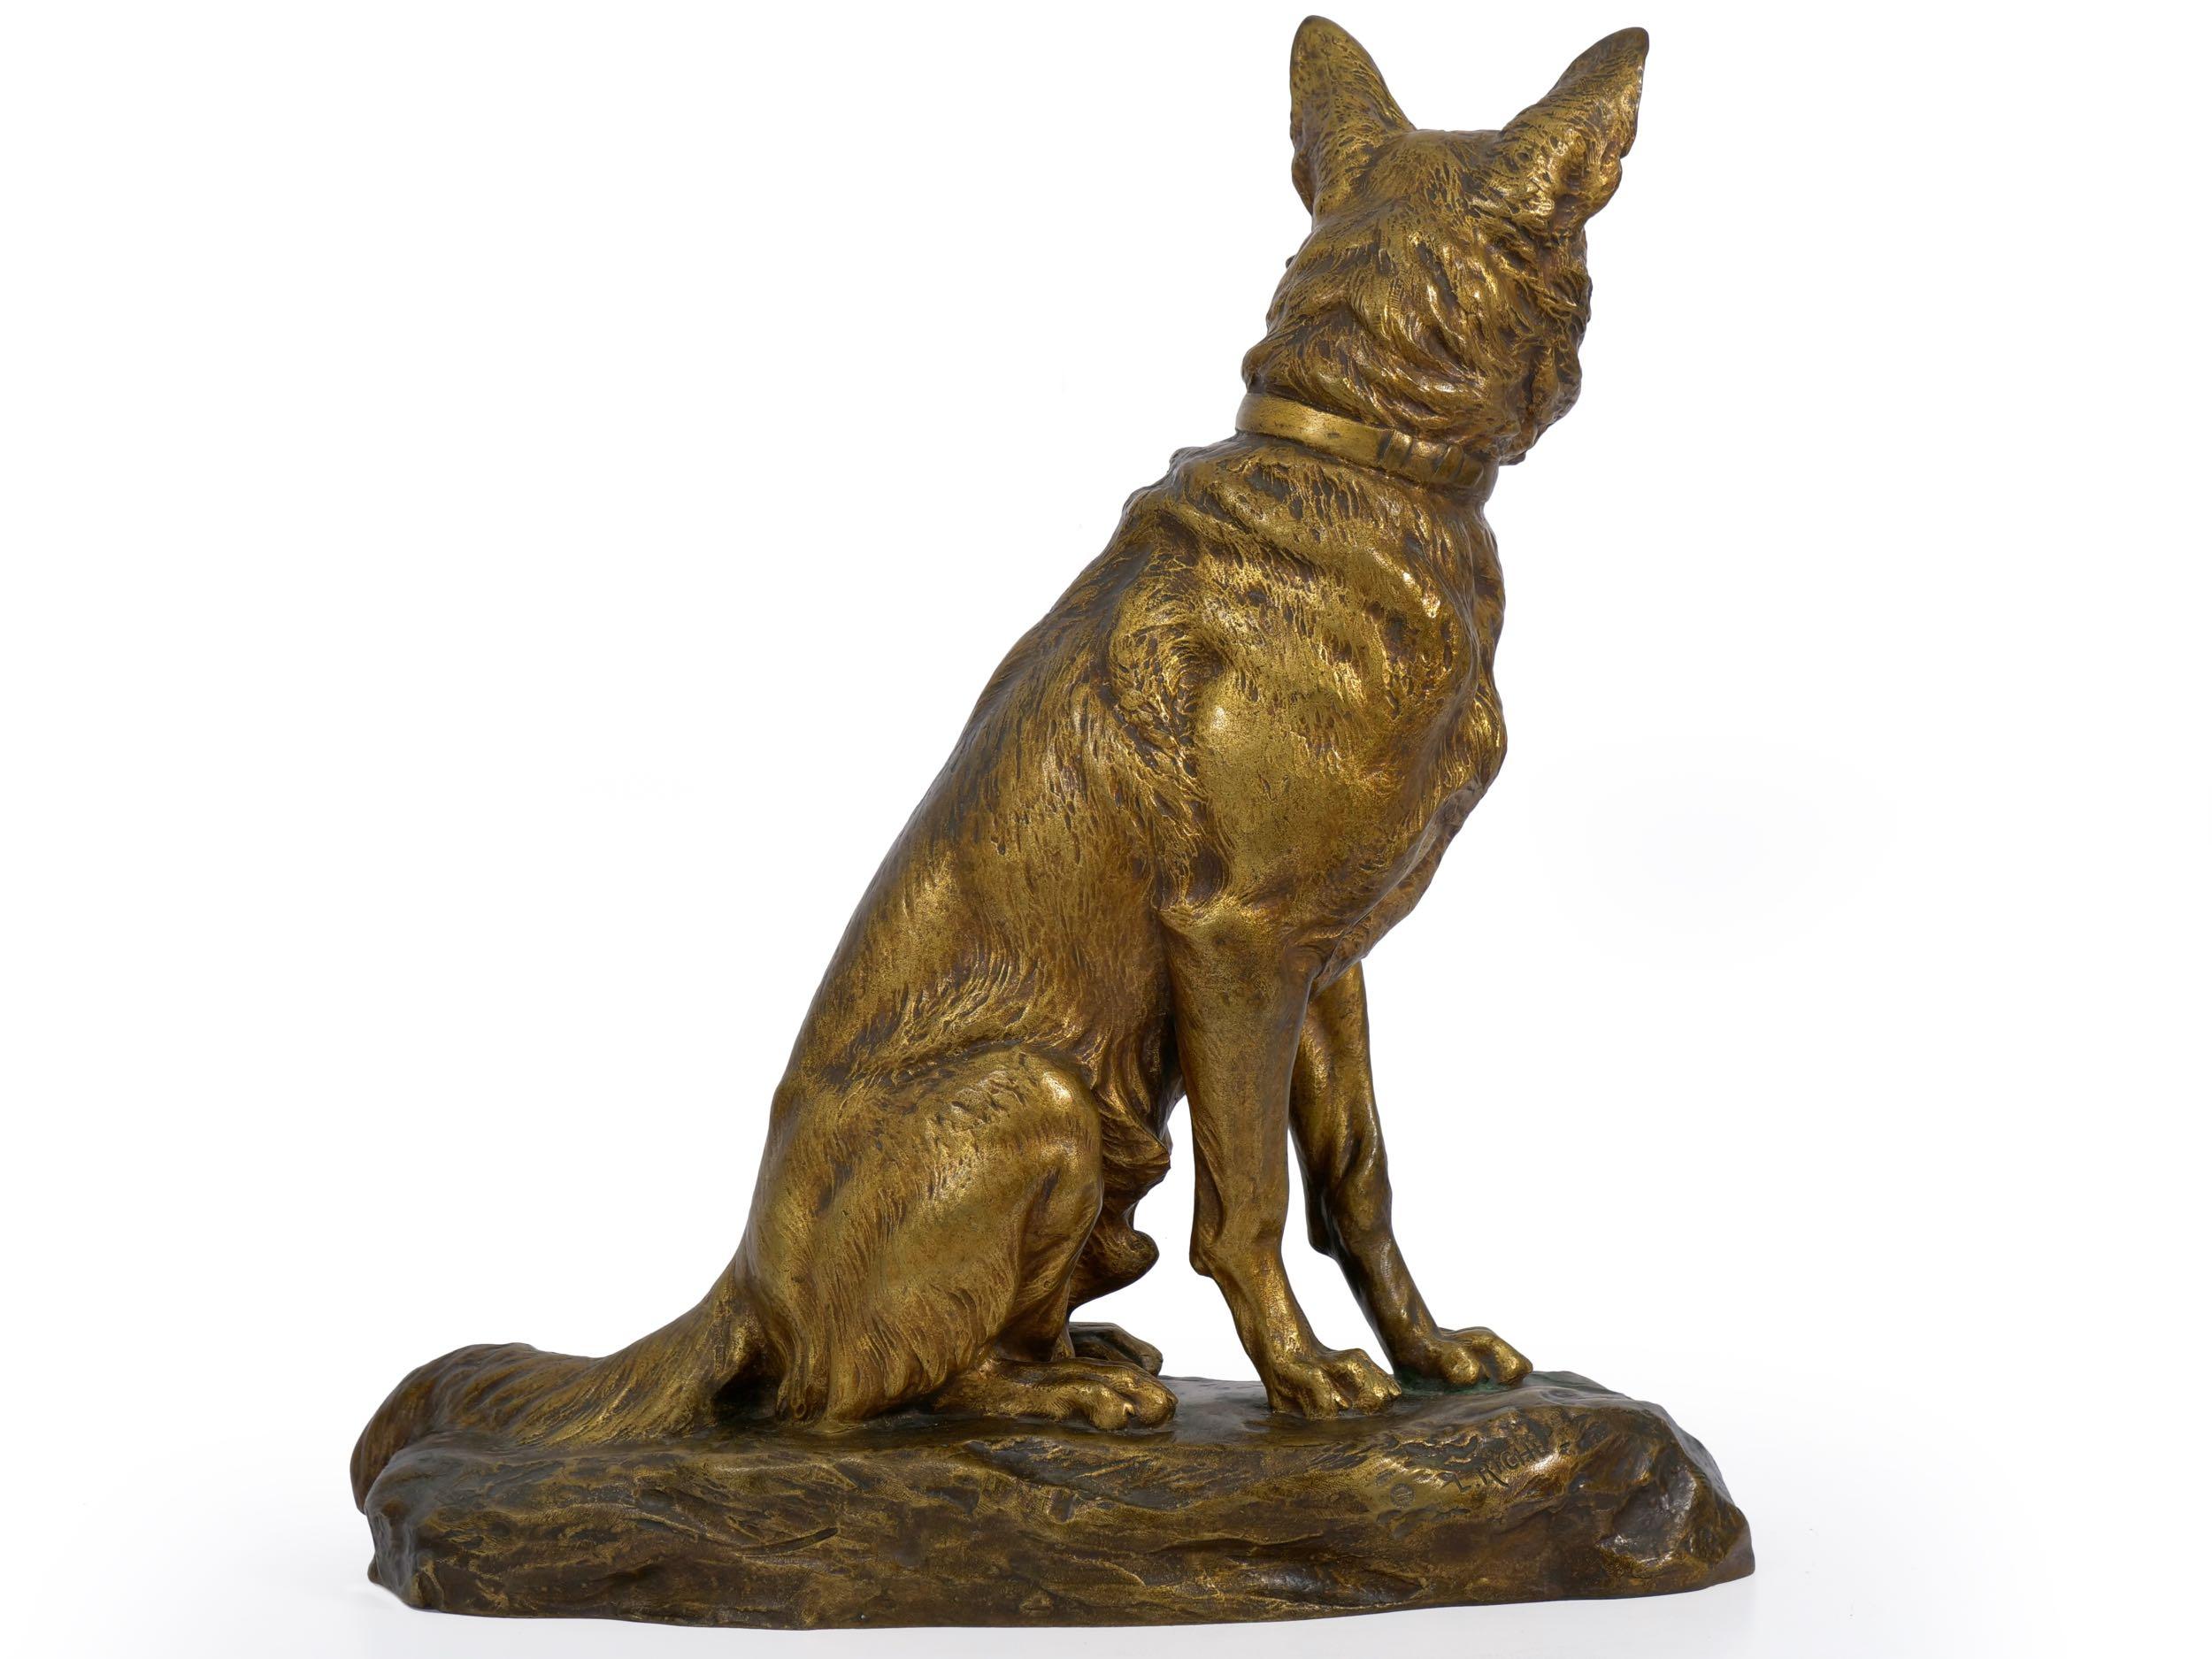 A fine gilt and patinated bronze sculpture that captures the figure of an Alsatian, often noted in literature as a German Shepherd. He is situated with an alert and friendly profile while seated over a rocky naturalistic base. The complex patina is